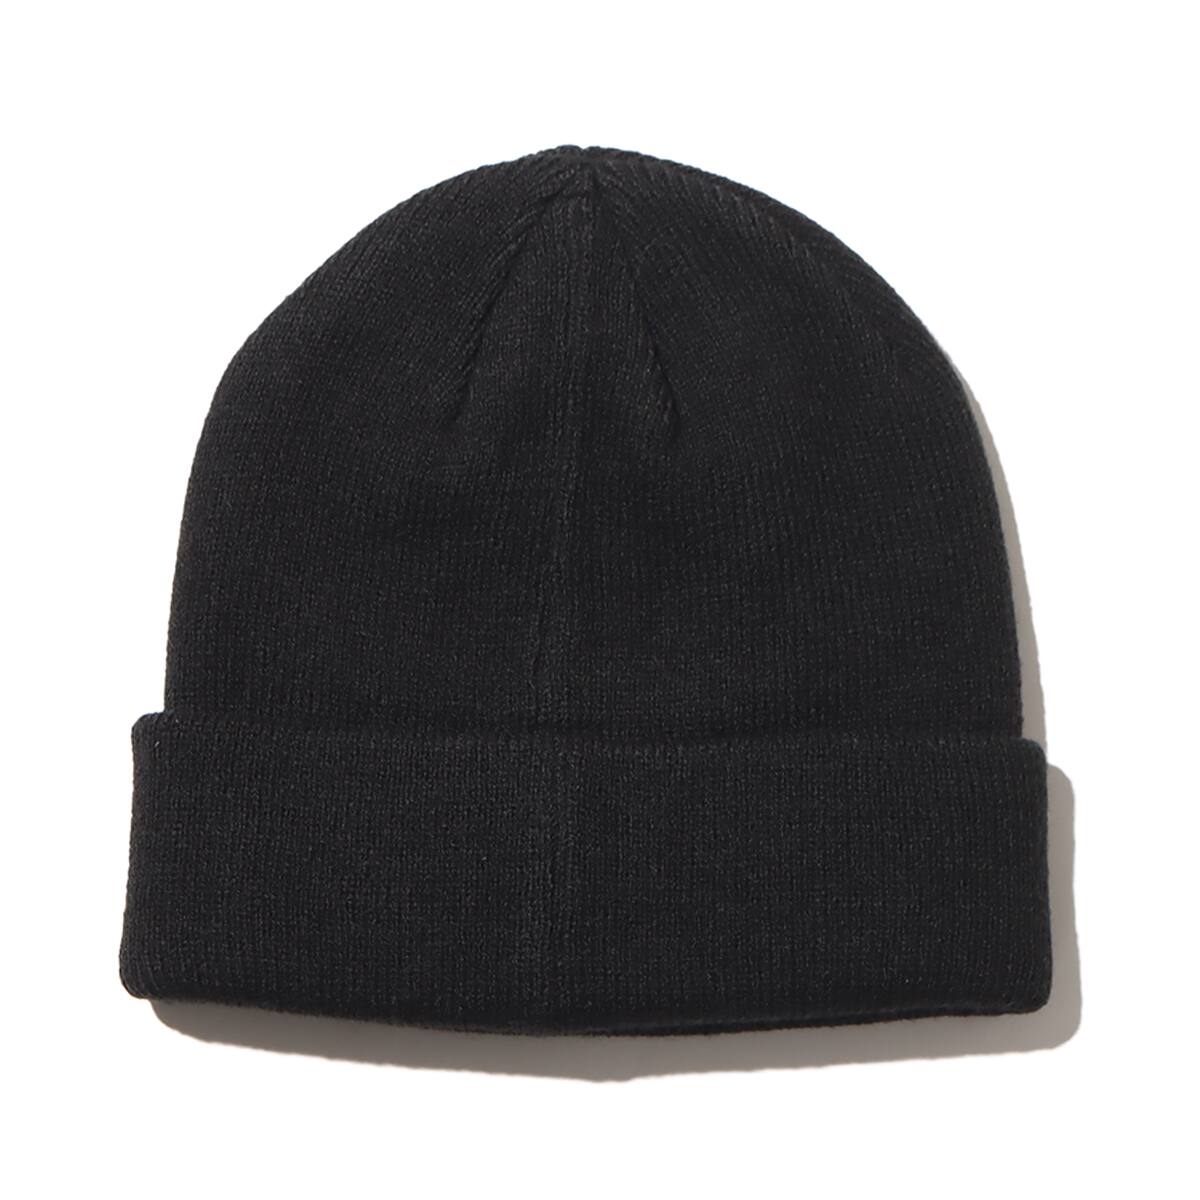 THE NORTH FACE EMBROID BULLET BEANIE BLACK 24SS-I